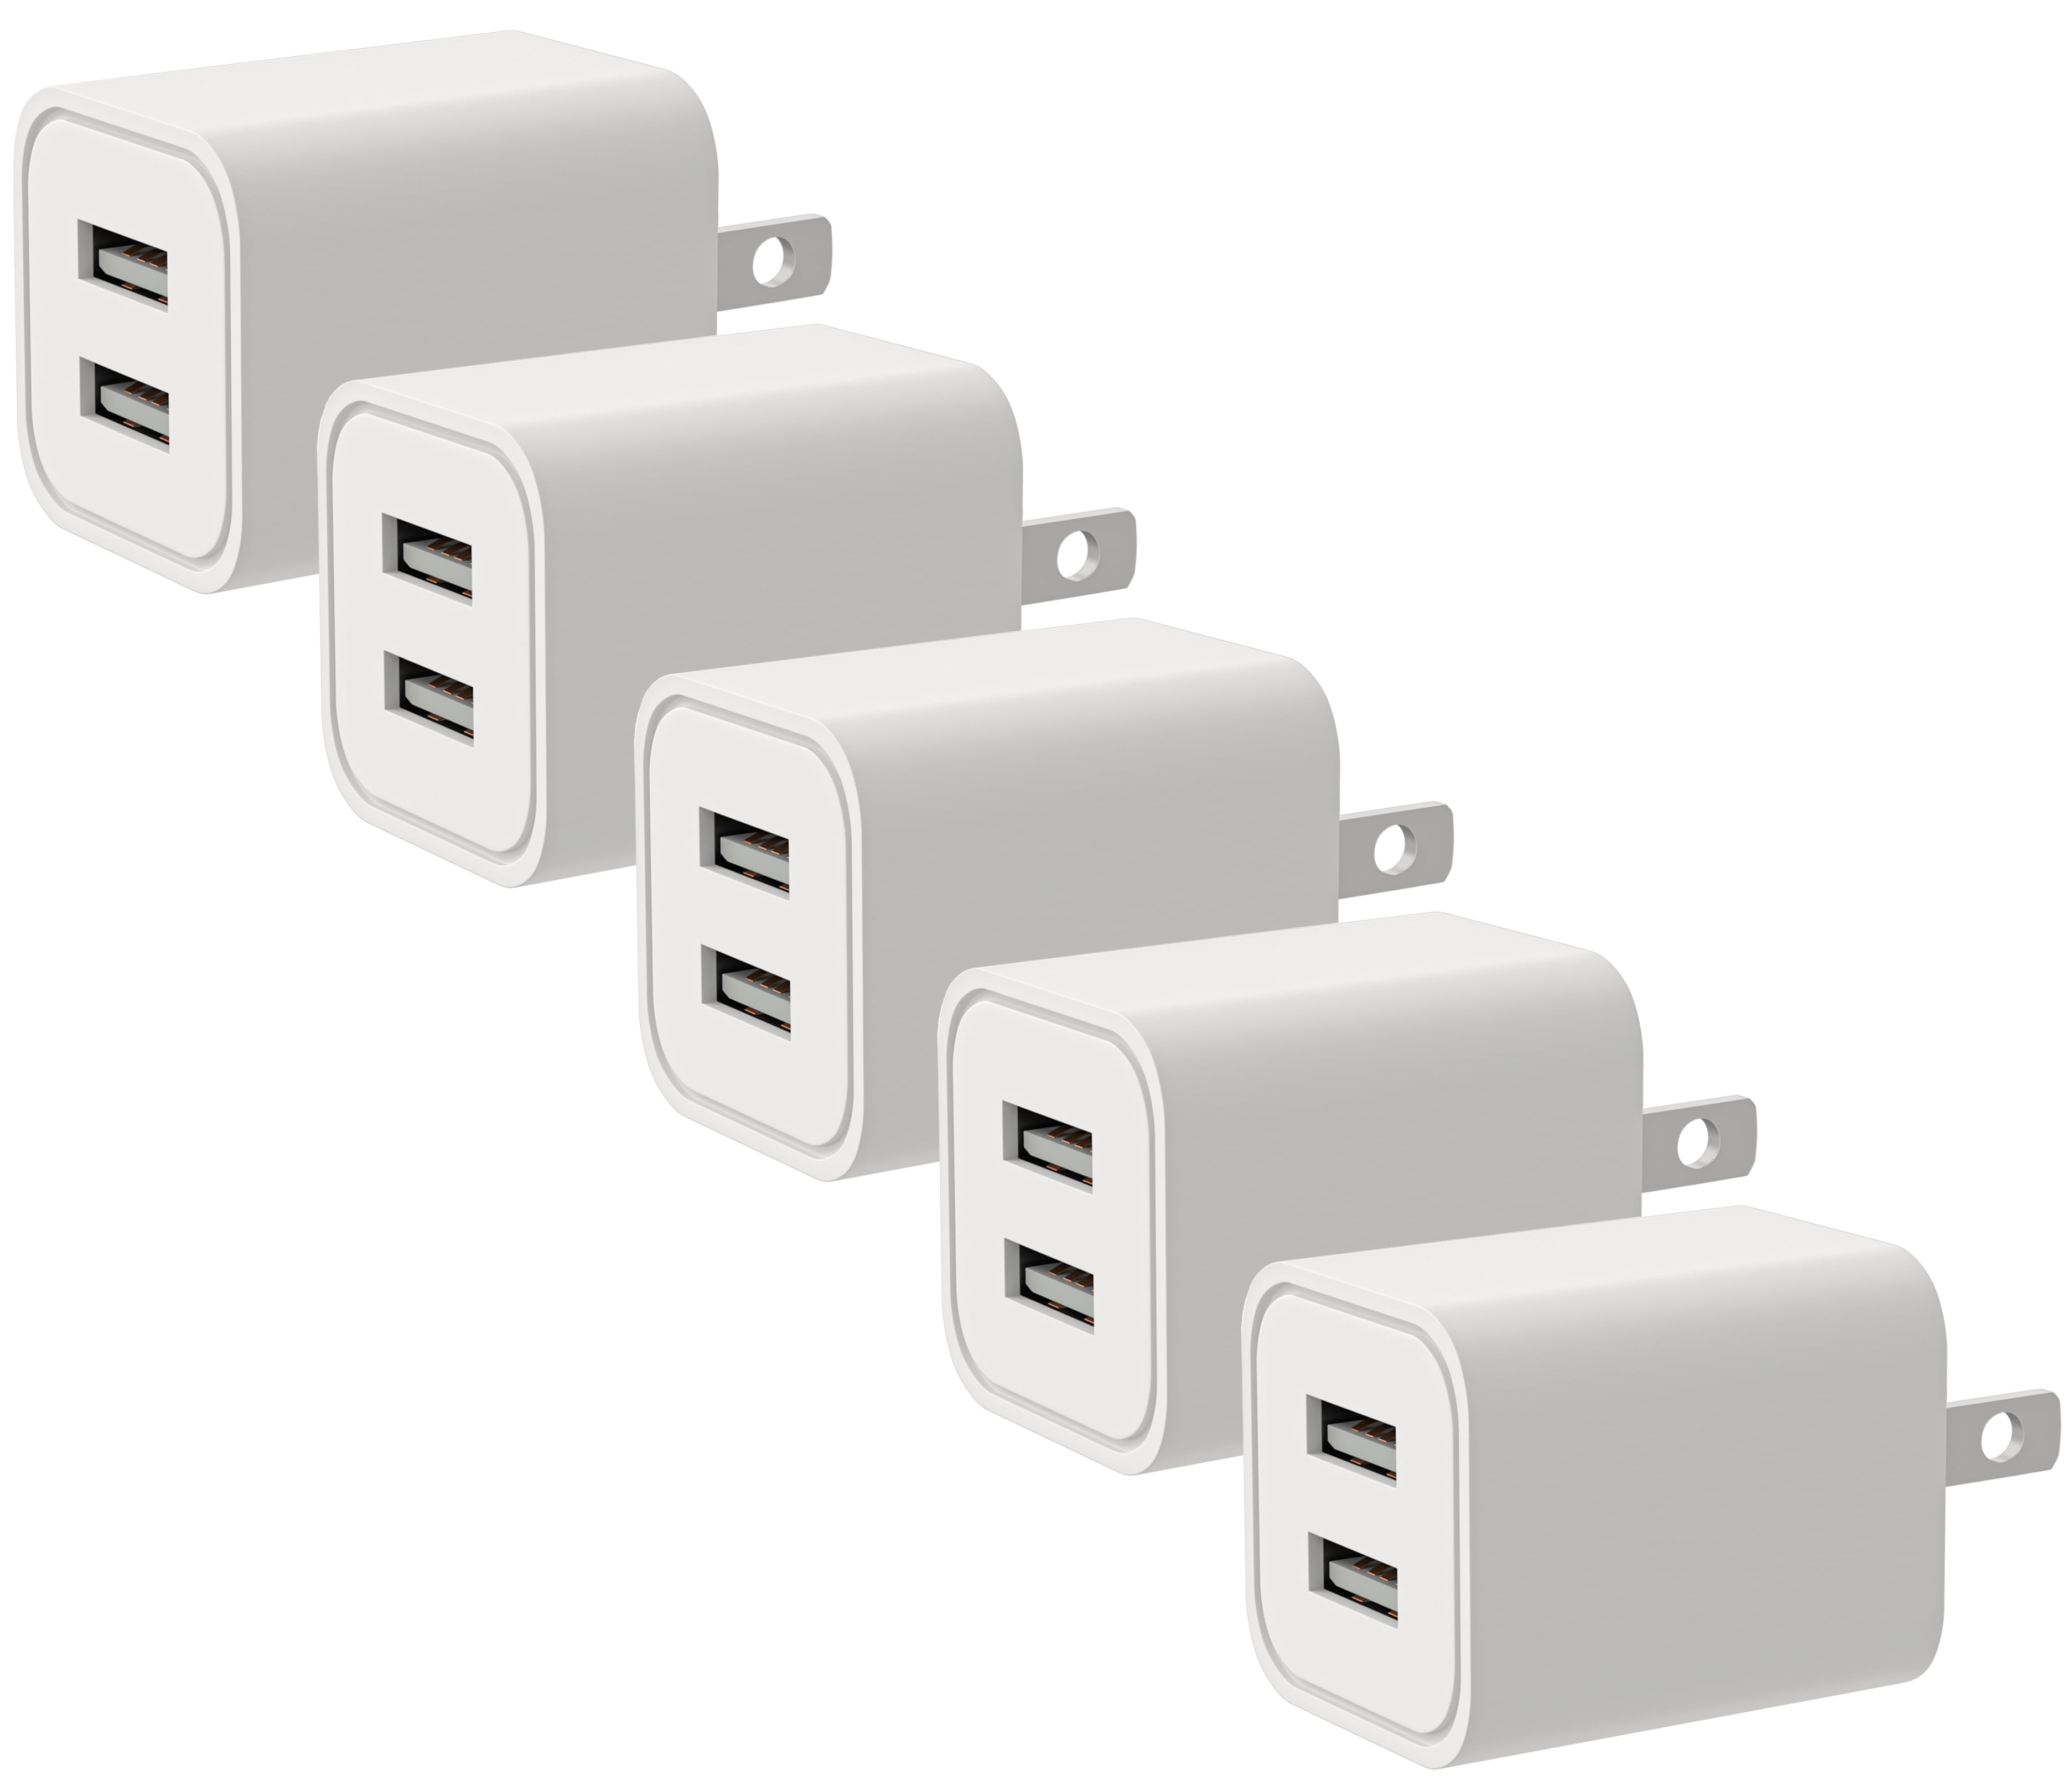 4 Port USB AC Wall Charger WHITE for iPad Air 2 mini 3 iPhone 7 6s 6 Plus 5s SE 